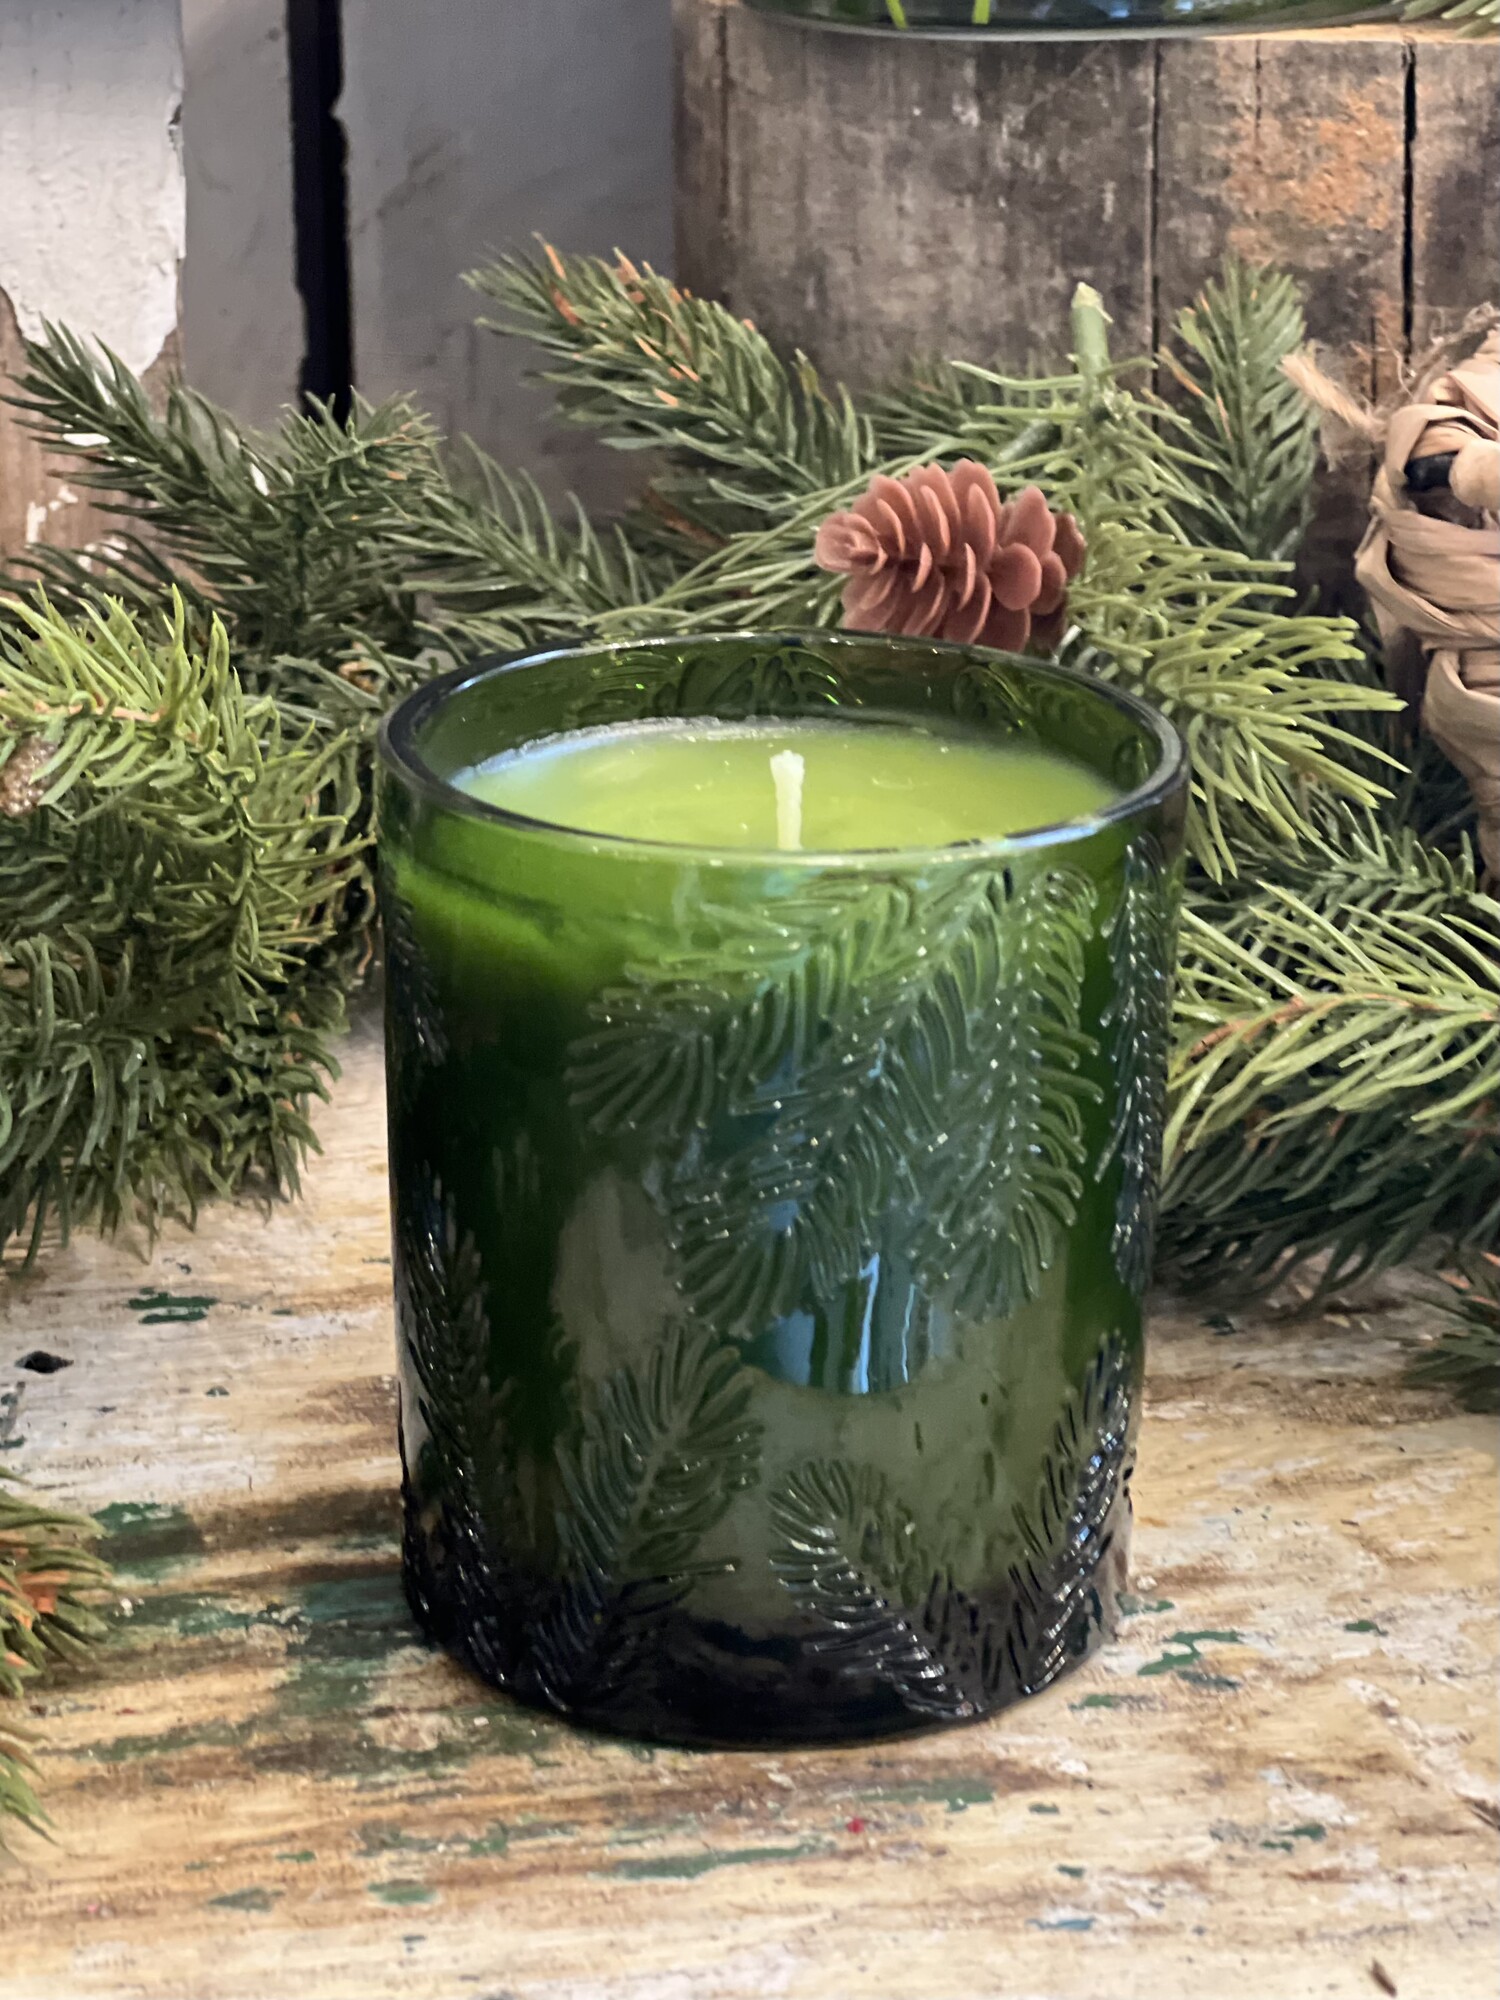 Moutain fresh and glowing with a snap of crisp siberian fir needles, cedarwood and relaxing sandlewood. This highly aromatic candle has such a beautiful scent that smells like a fresh cut Christmas tree but is great to use year round. This  candle is 6.5 ounces